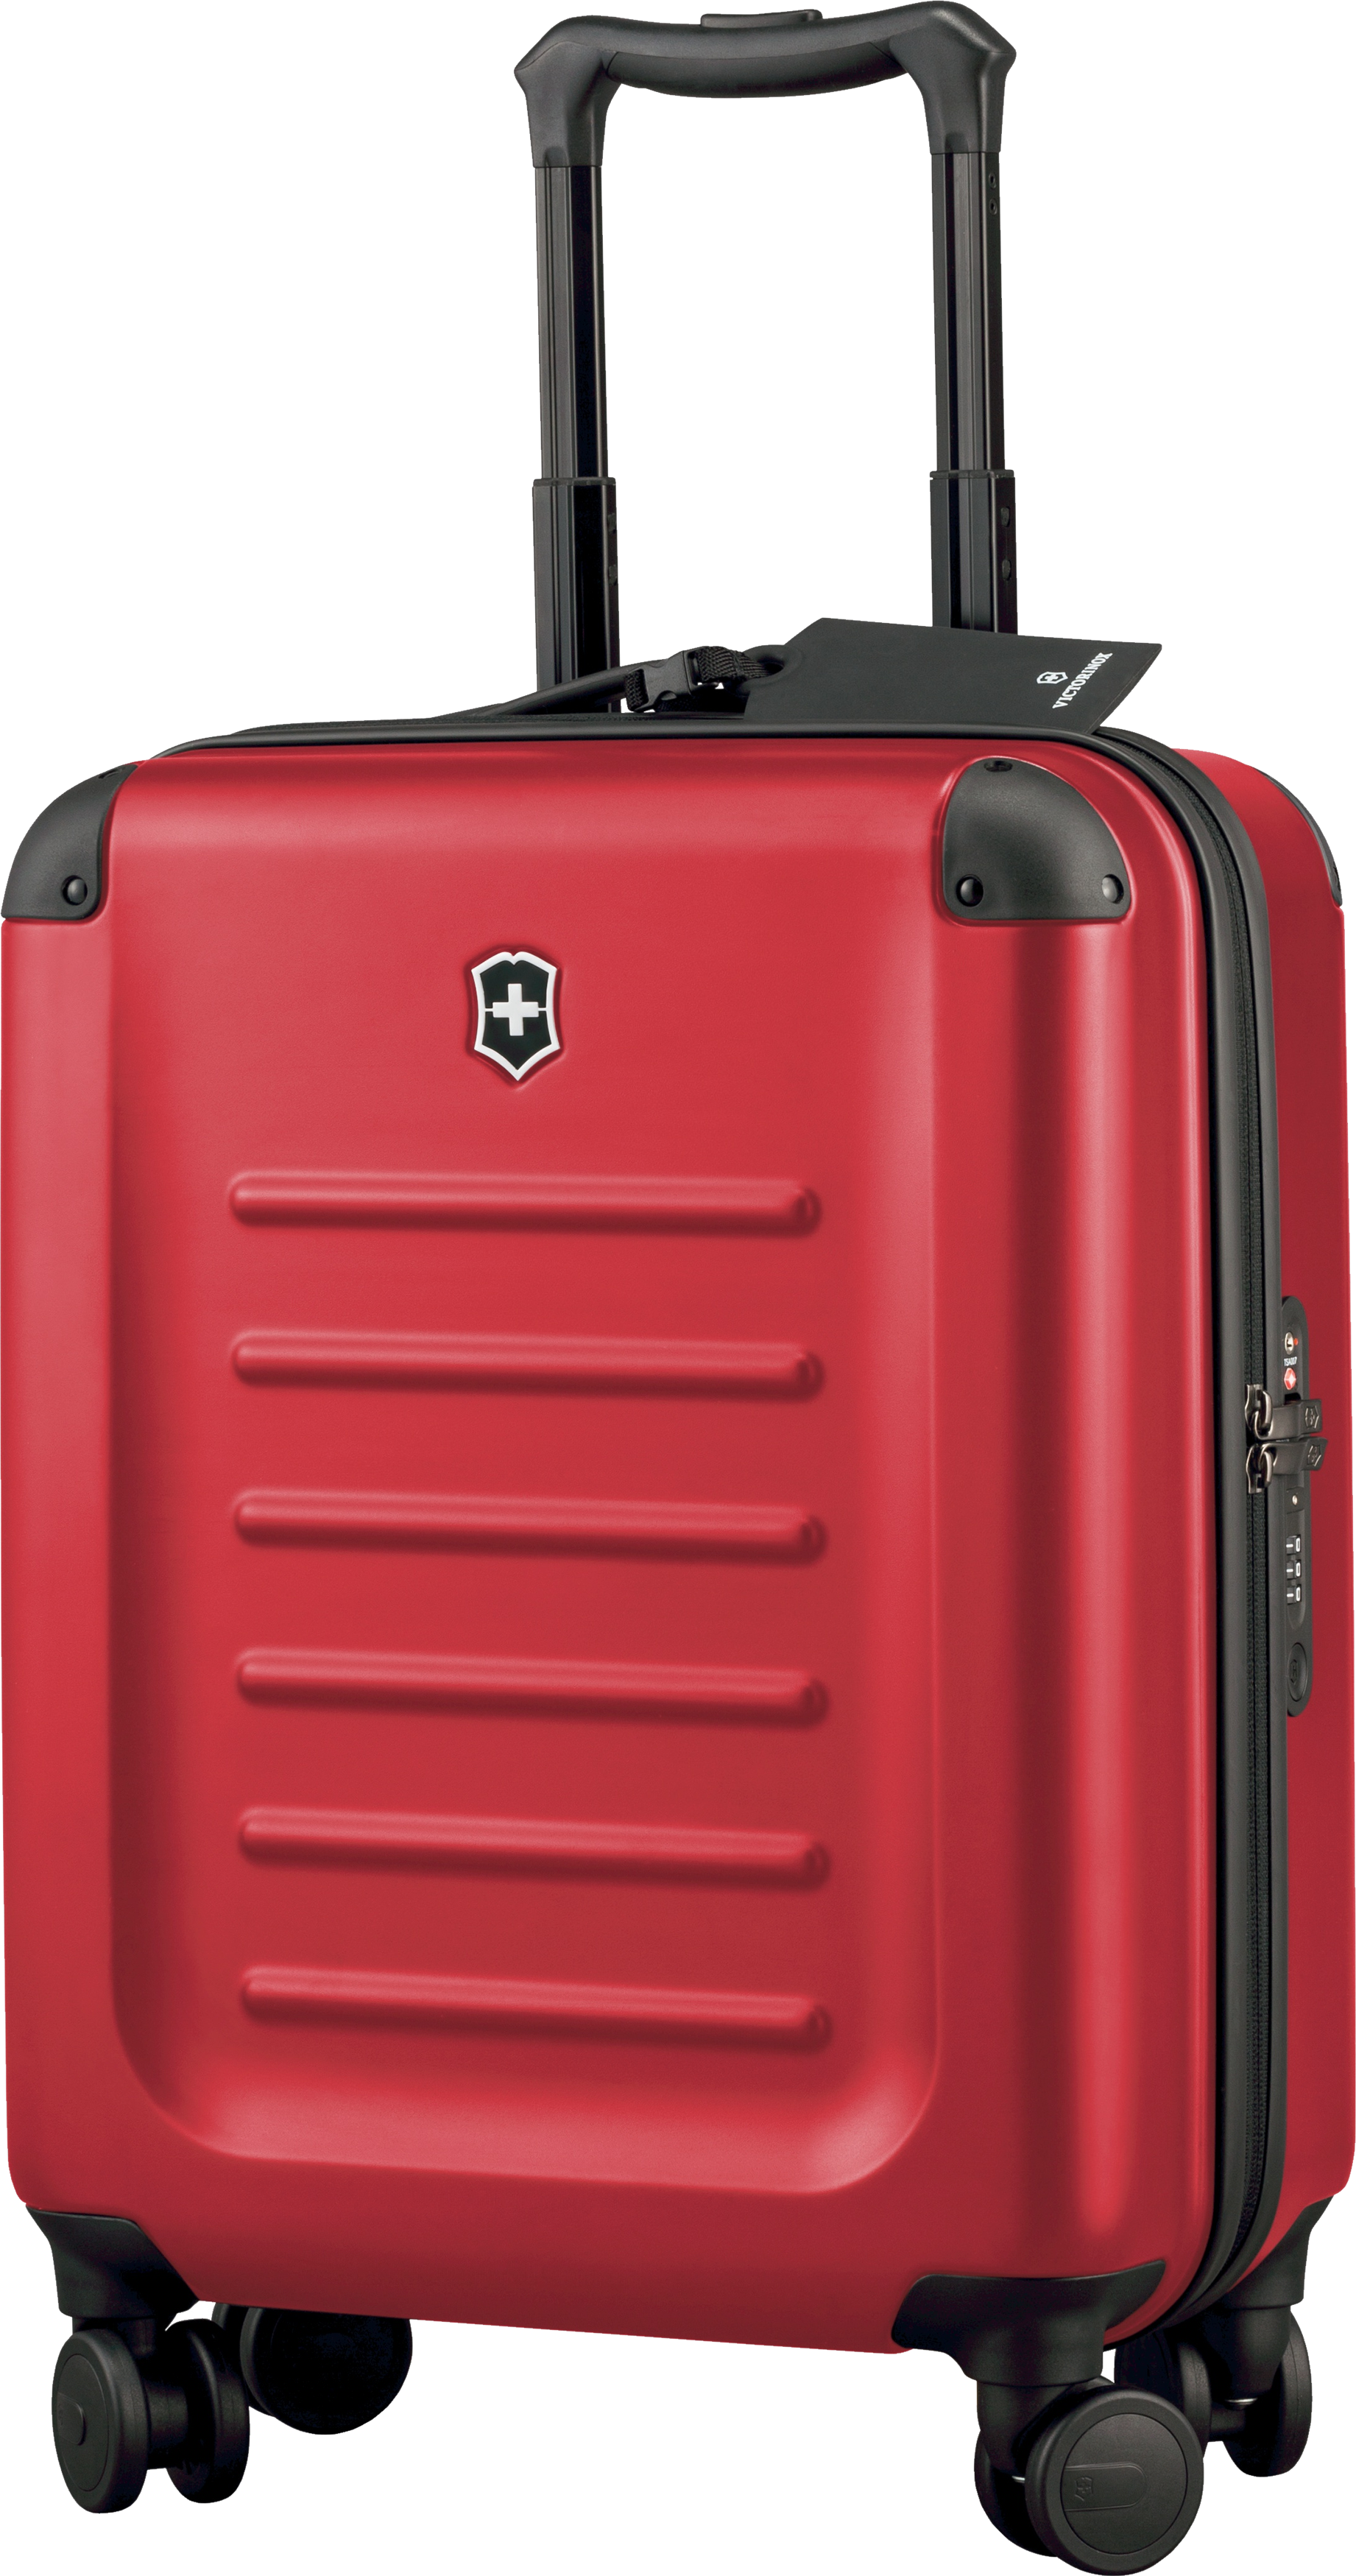 Luggage Png File PNG Image